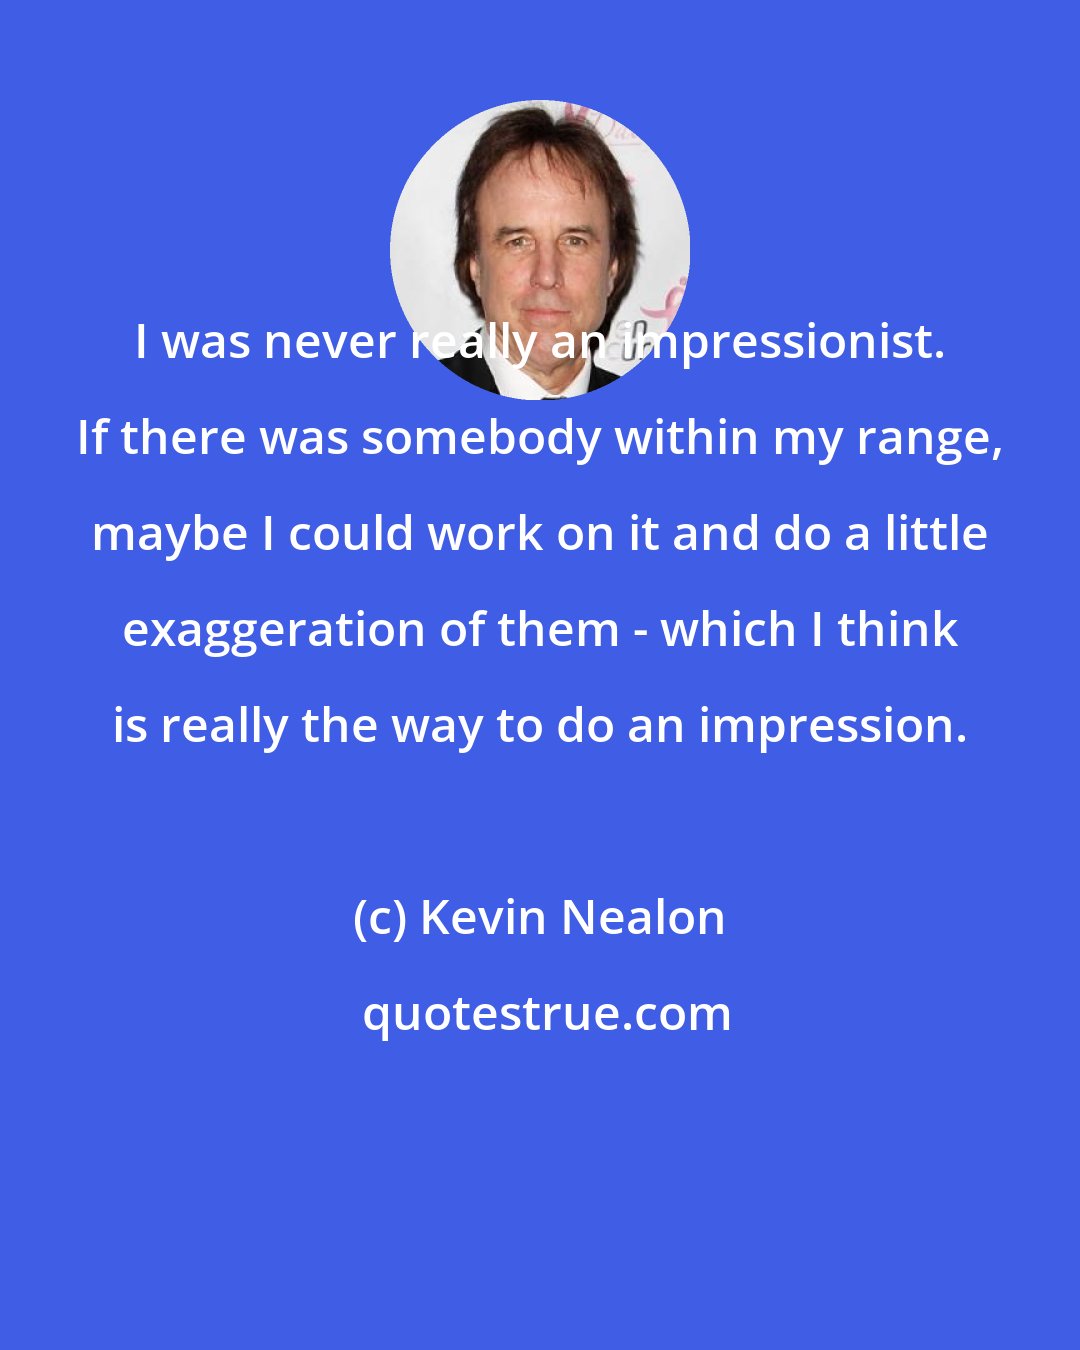 Kevin Nealon: I was never really an impressionist. If there was somebody within my range, maybe I could work on it and do a little exaggeration of them - which I think is really the way to do an impression.